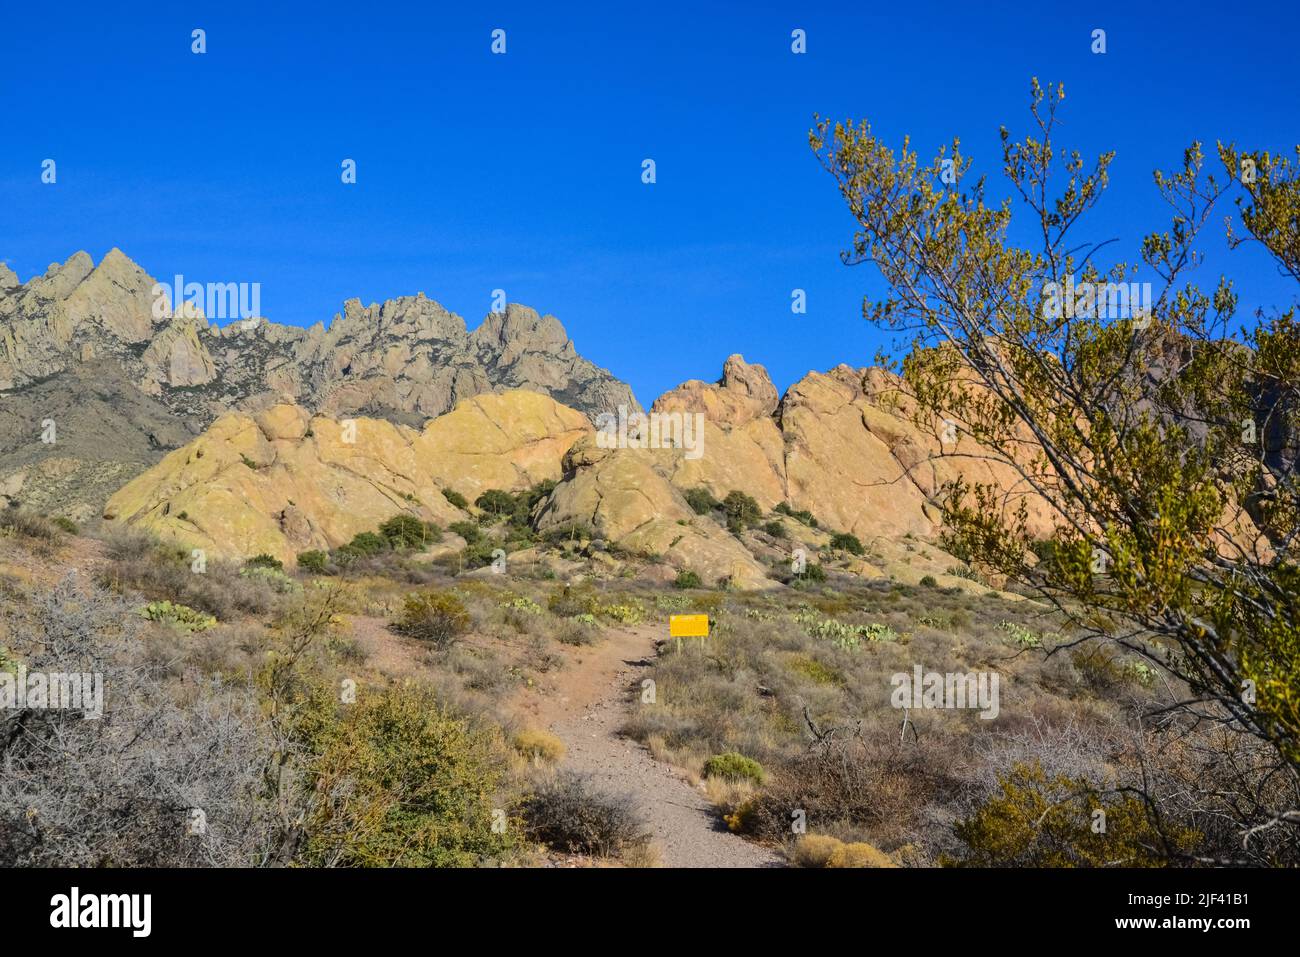 Hiking trail, Mountain landscape with yucca, cacti and desert plants in 'Organ Mountains-Desert Peaks National Monument' in New Mexico, USA Stock Photo